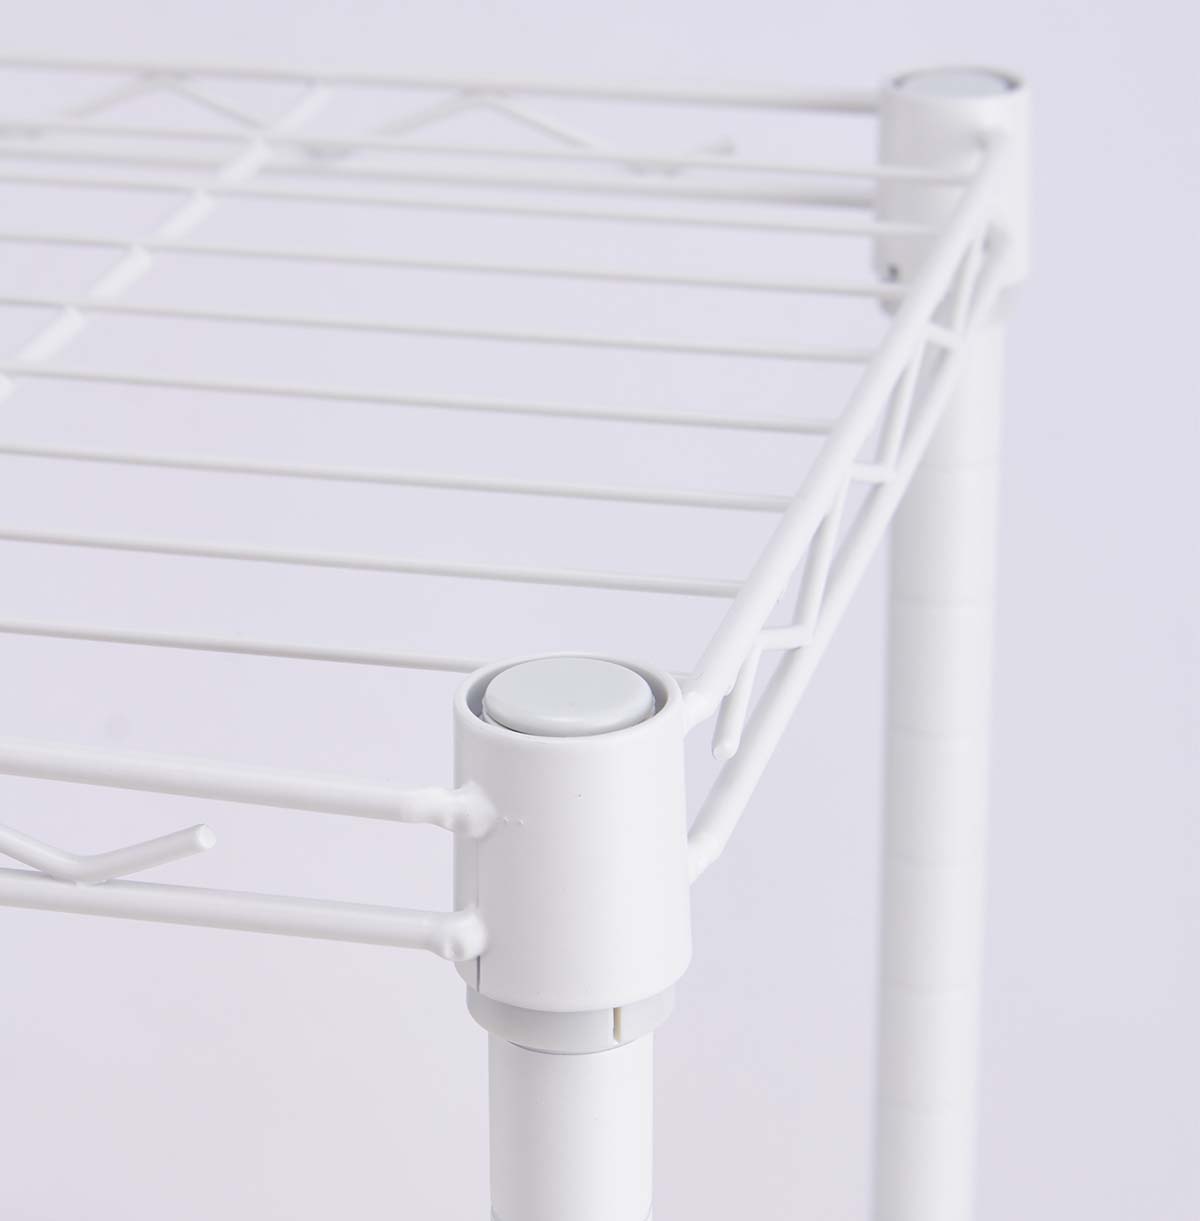 white wire shelving unit manufacturer